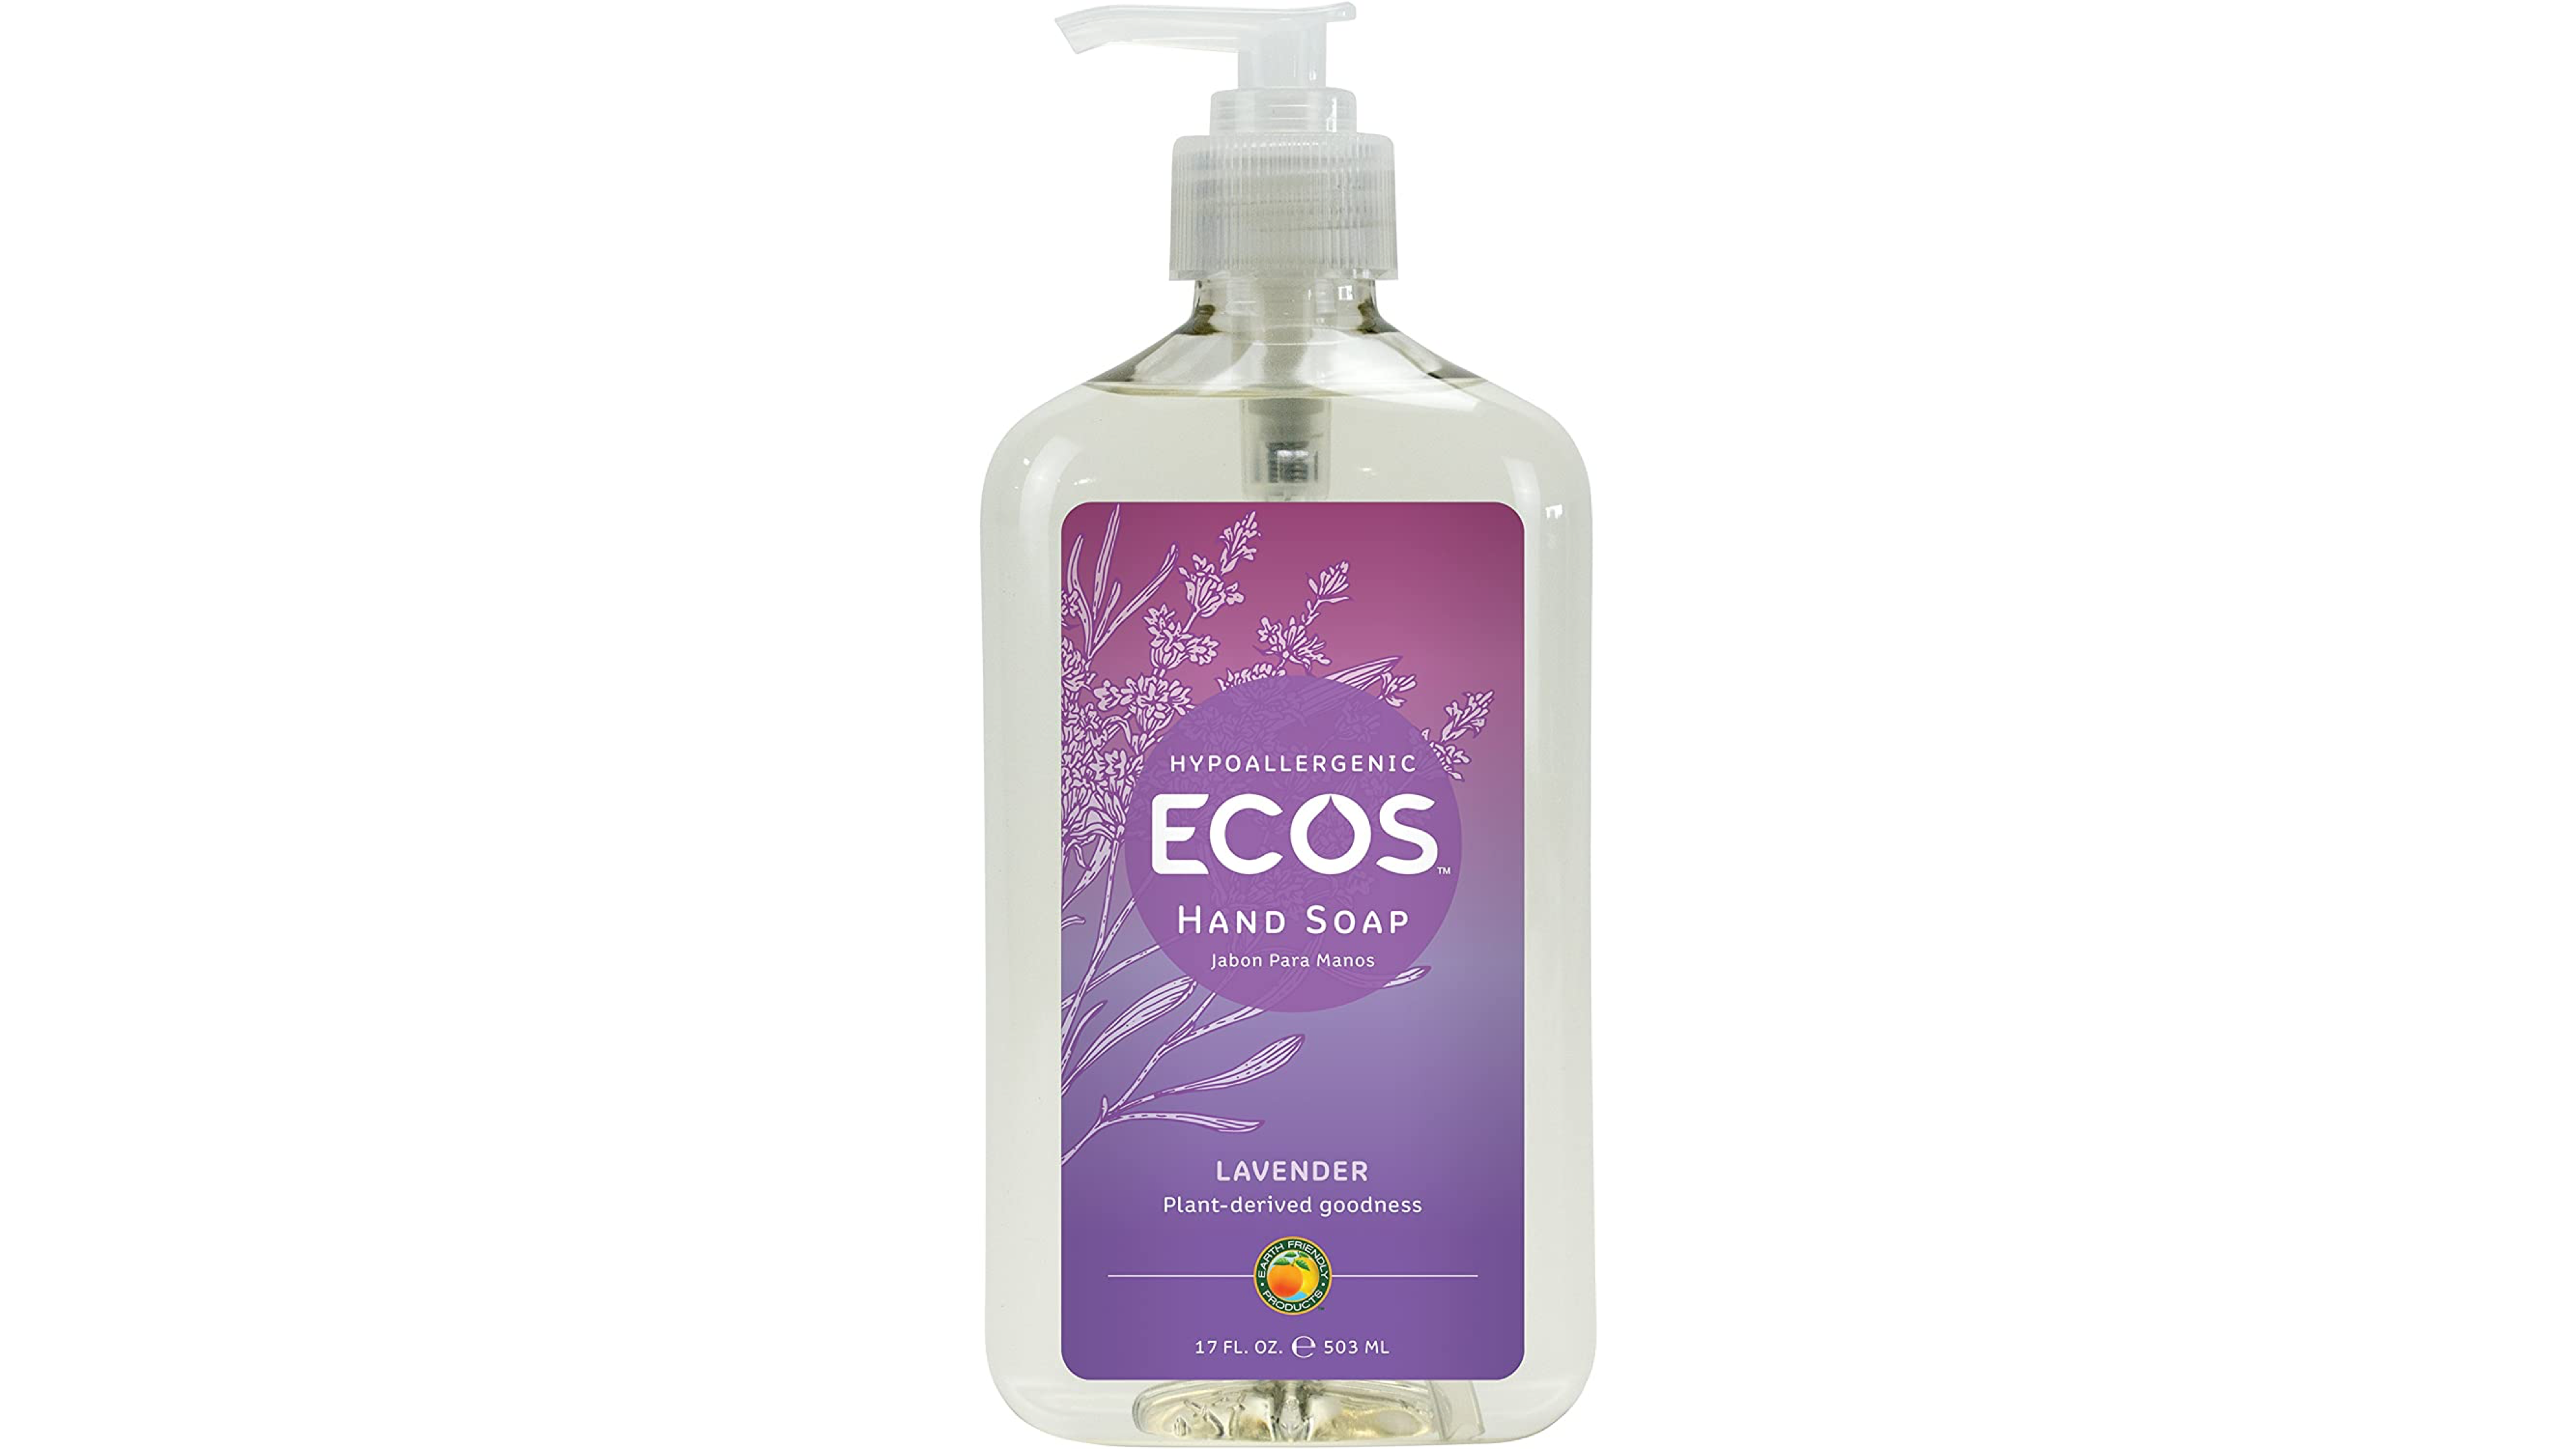 hypoallergenic hand soap made in carbon neutral factories